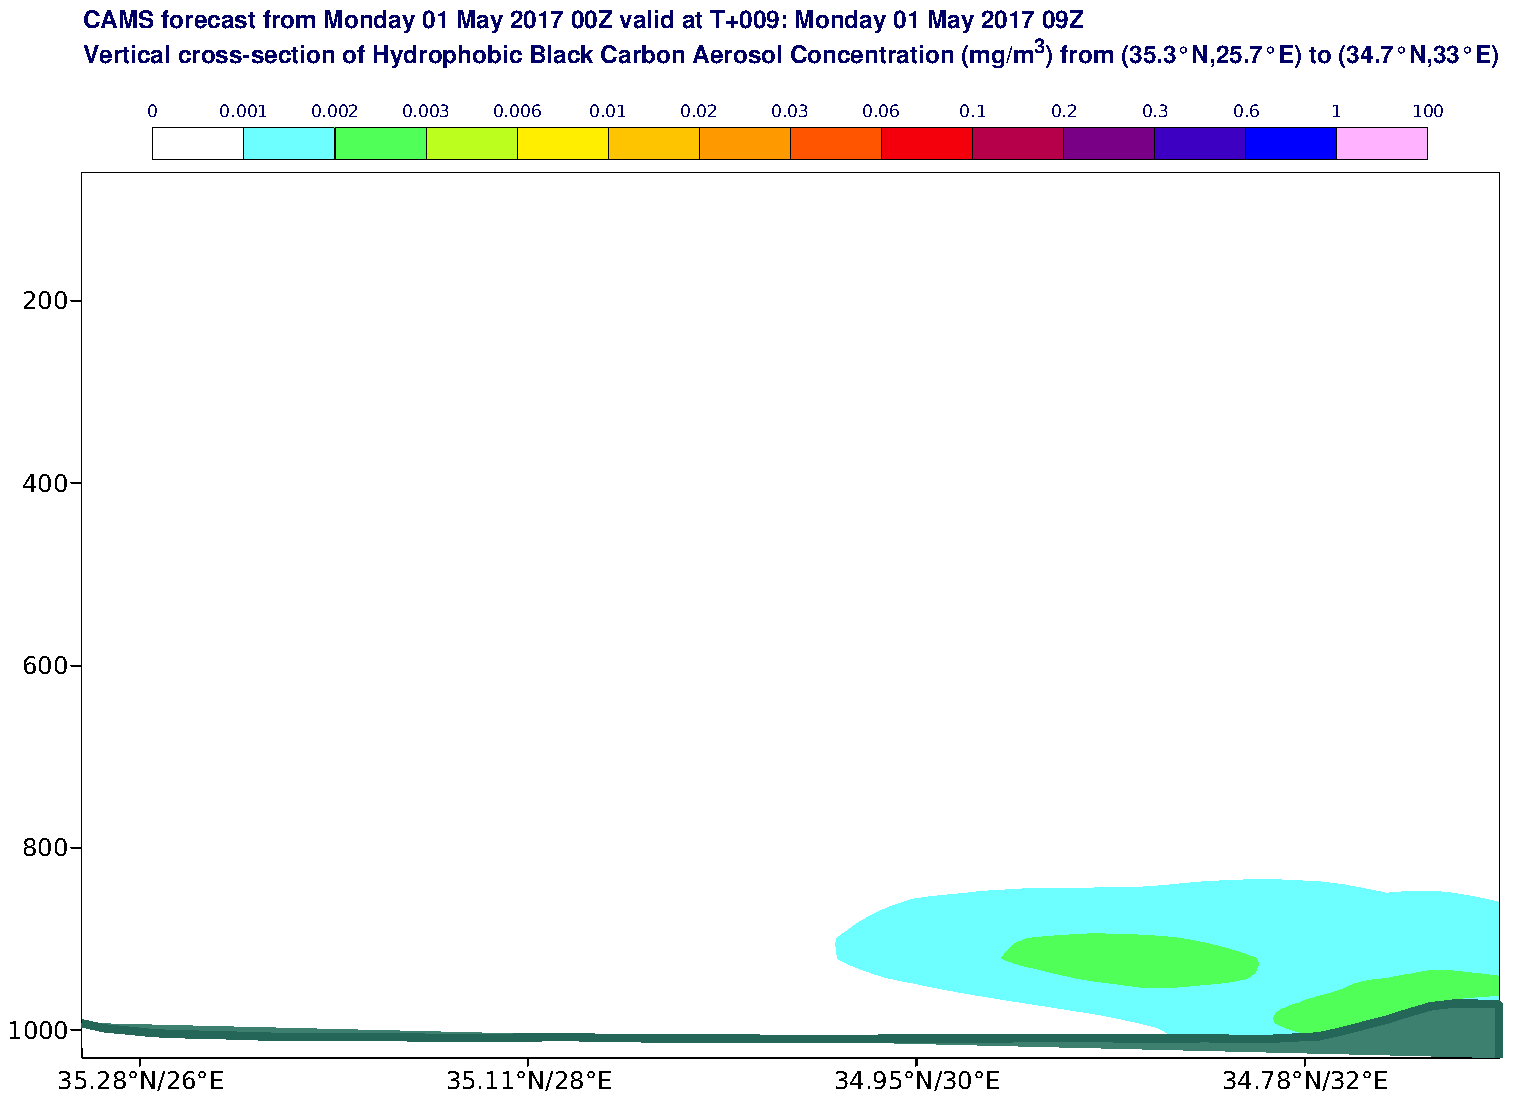 Vertical cross-section of Hydrophobic Black Carbon Aerosol Concentration (mg/m3) valid at T9 - 2017-05-01 09:00